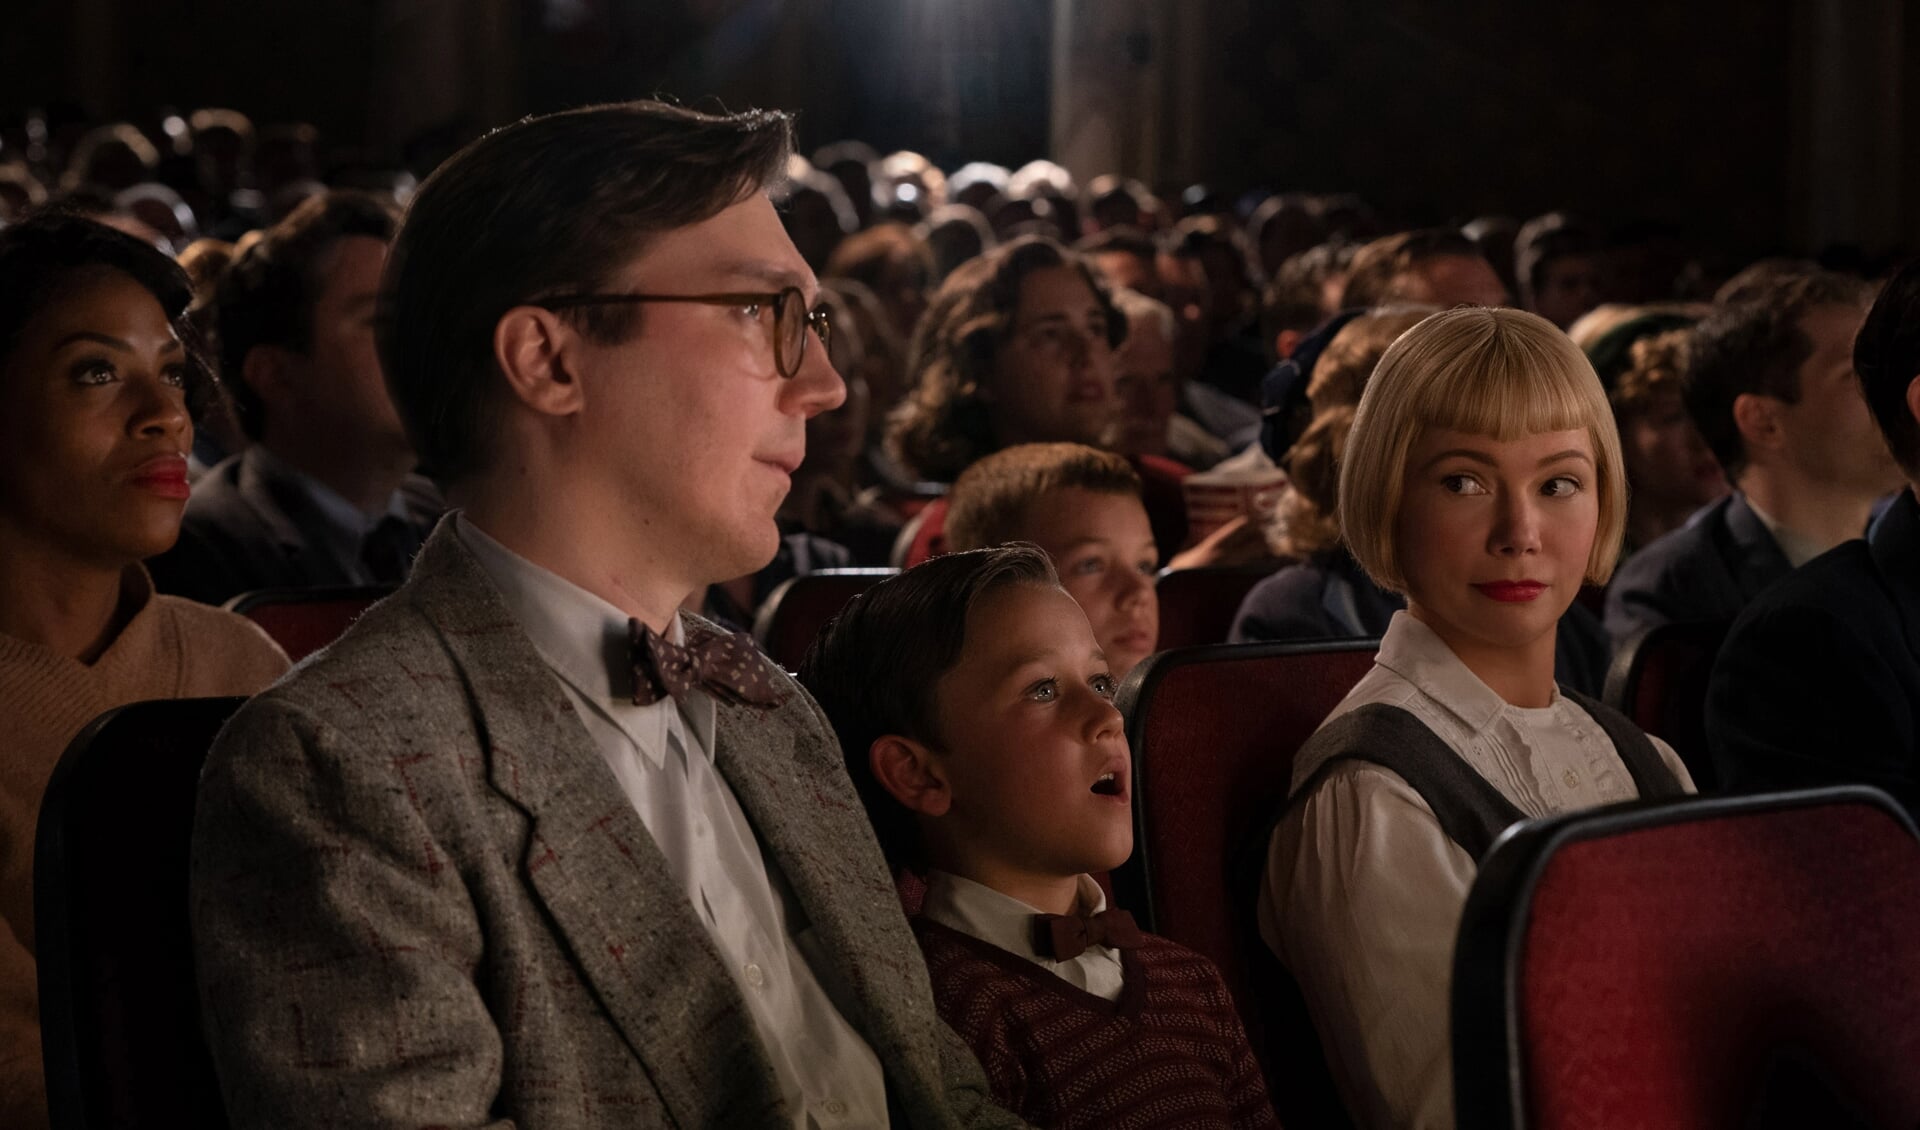 (from left) Burt Fabelman (Paul Dano), Younger Sammy Fabelman (Mateo Zoryan Francis-DeFord) and Mitzi Fabelman (Michelle Williams) in The Fabelmans, co-written, produced and directed by Steven Spielberg.